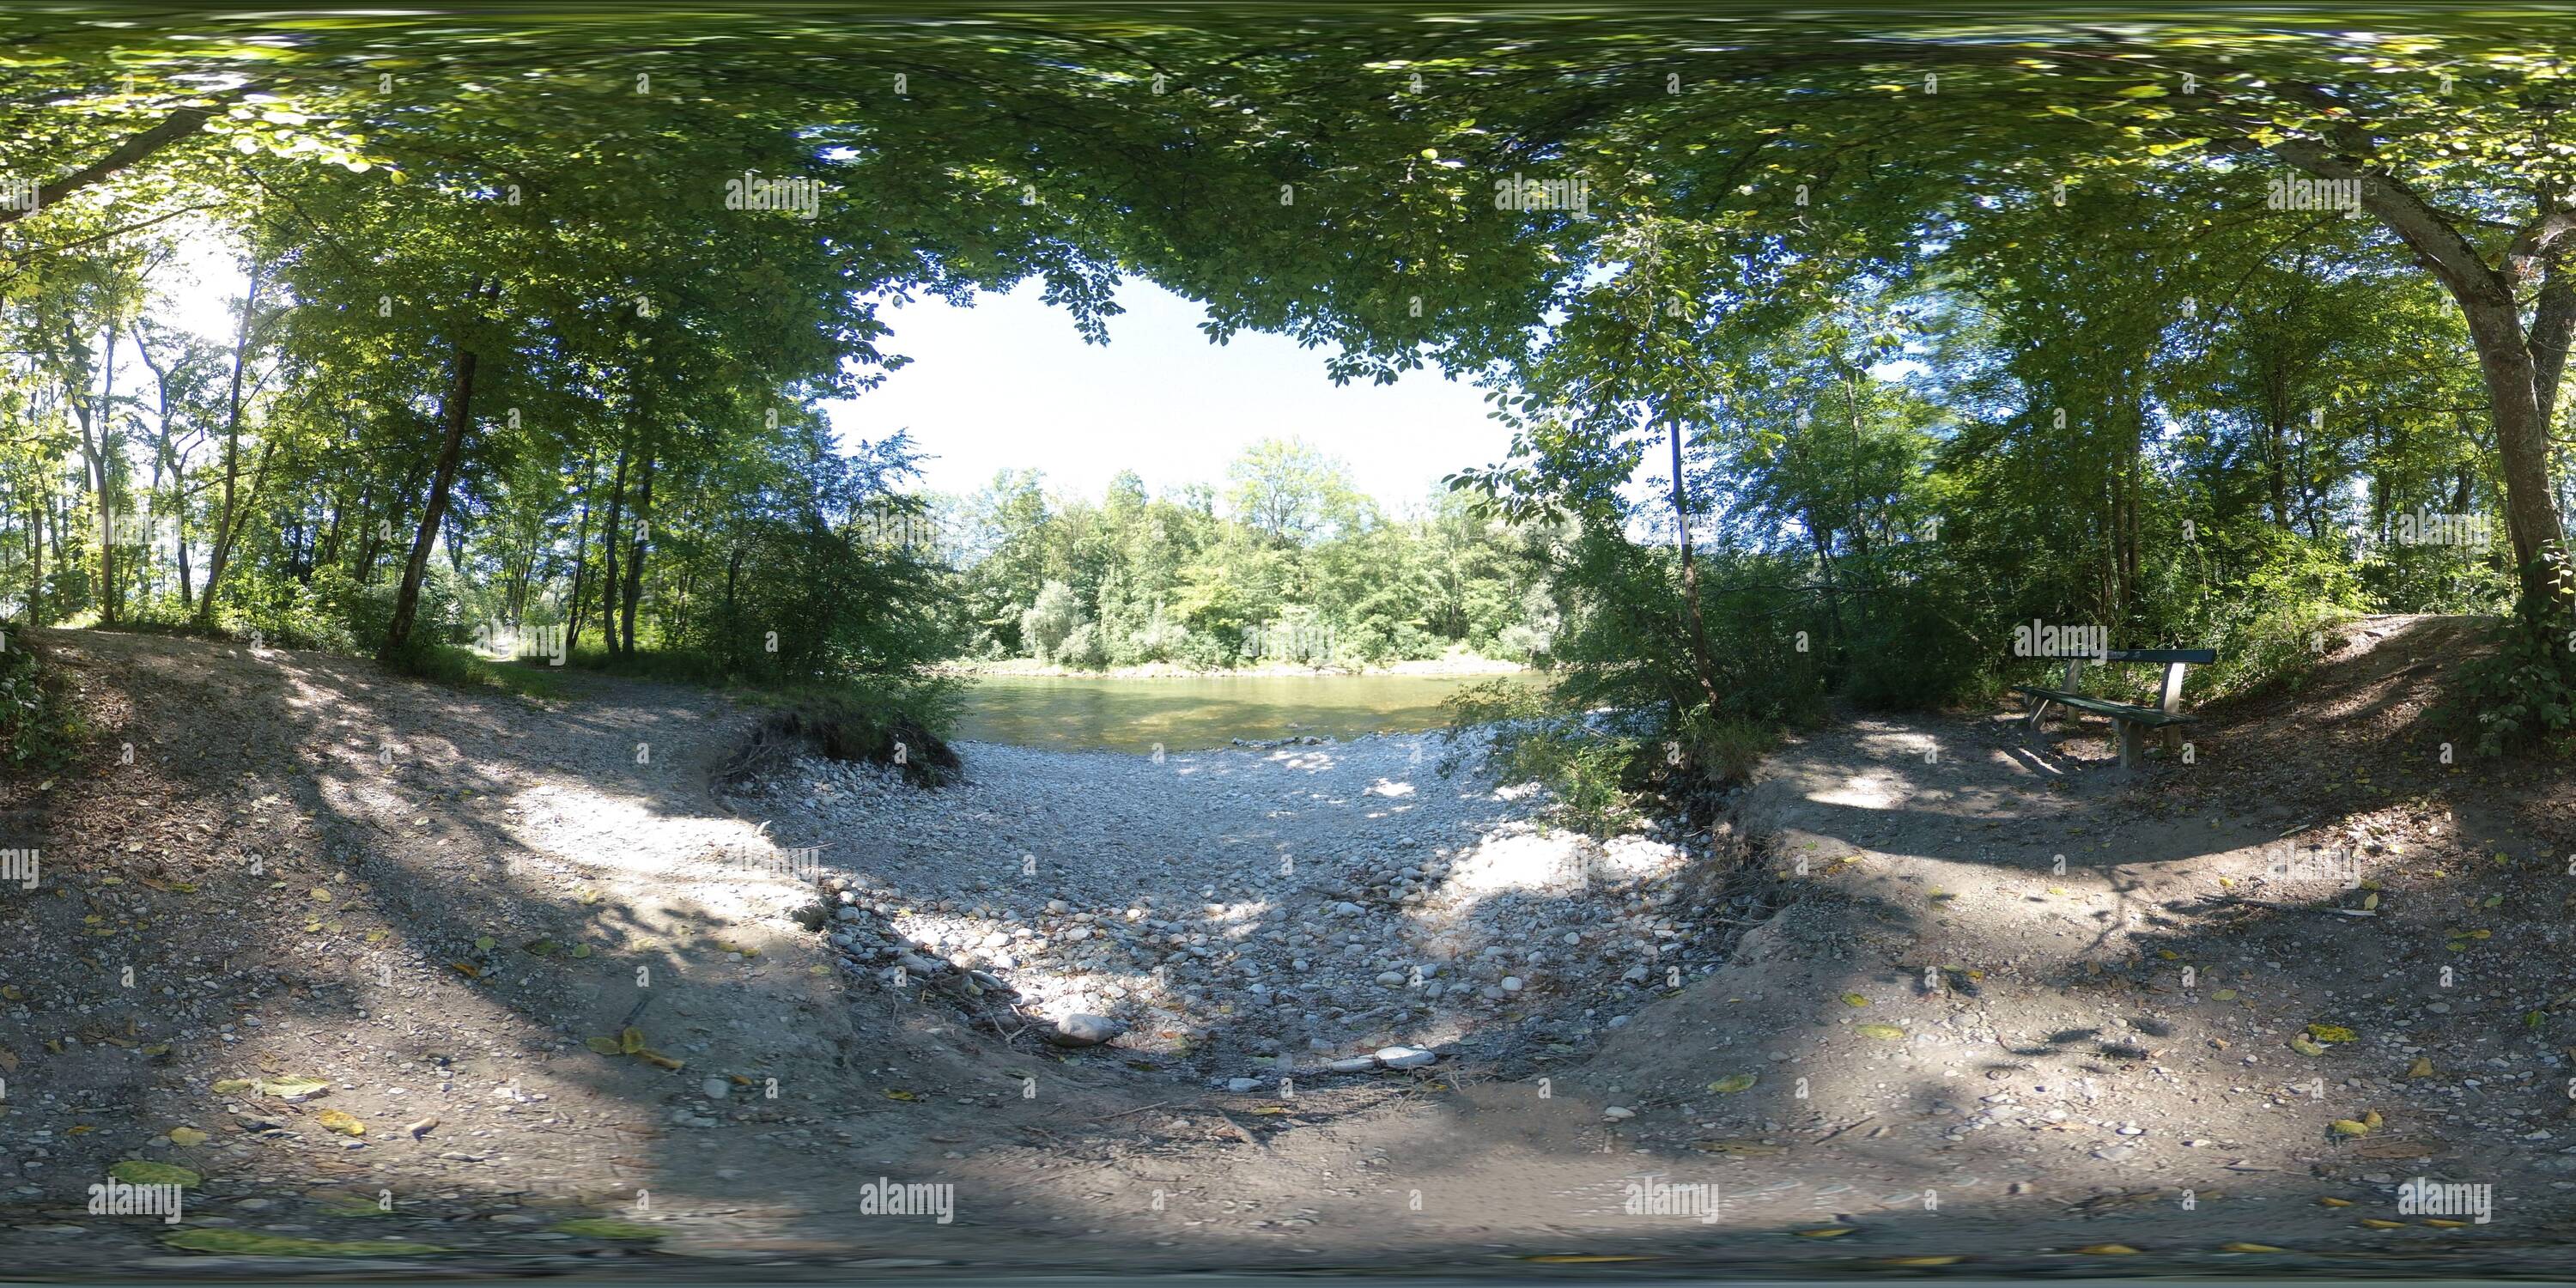 360 degree panoramic view of photosphere in a small forest near a river